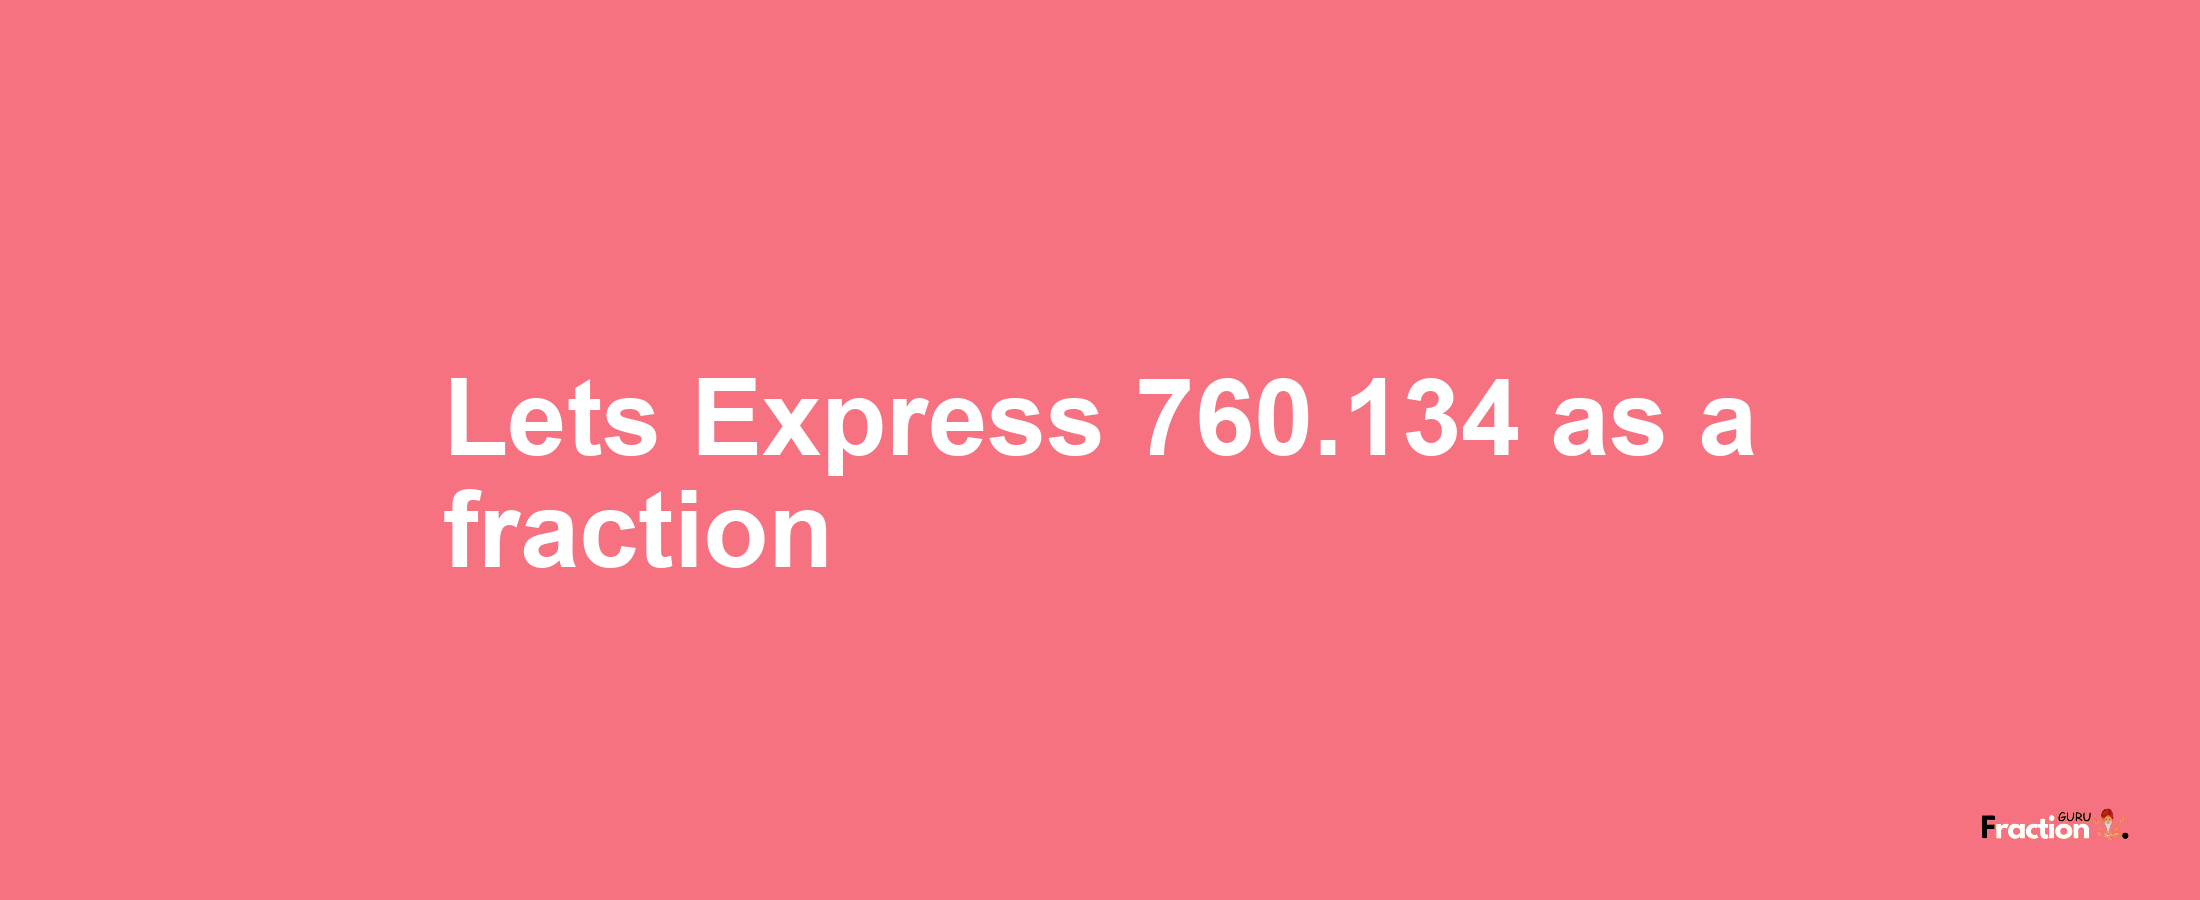 Lets Express 760.134 as afraction